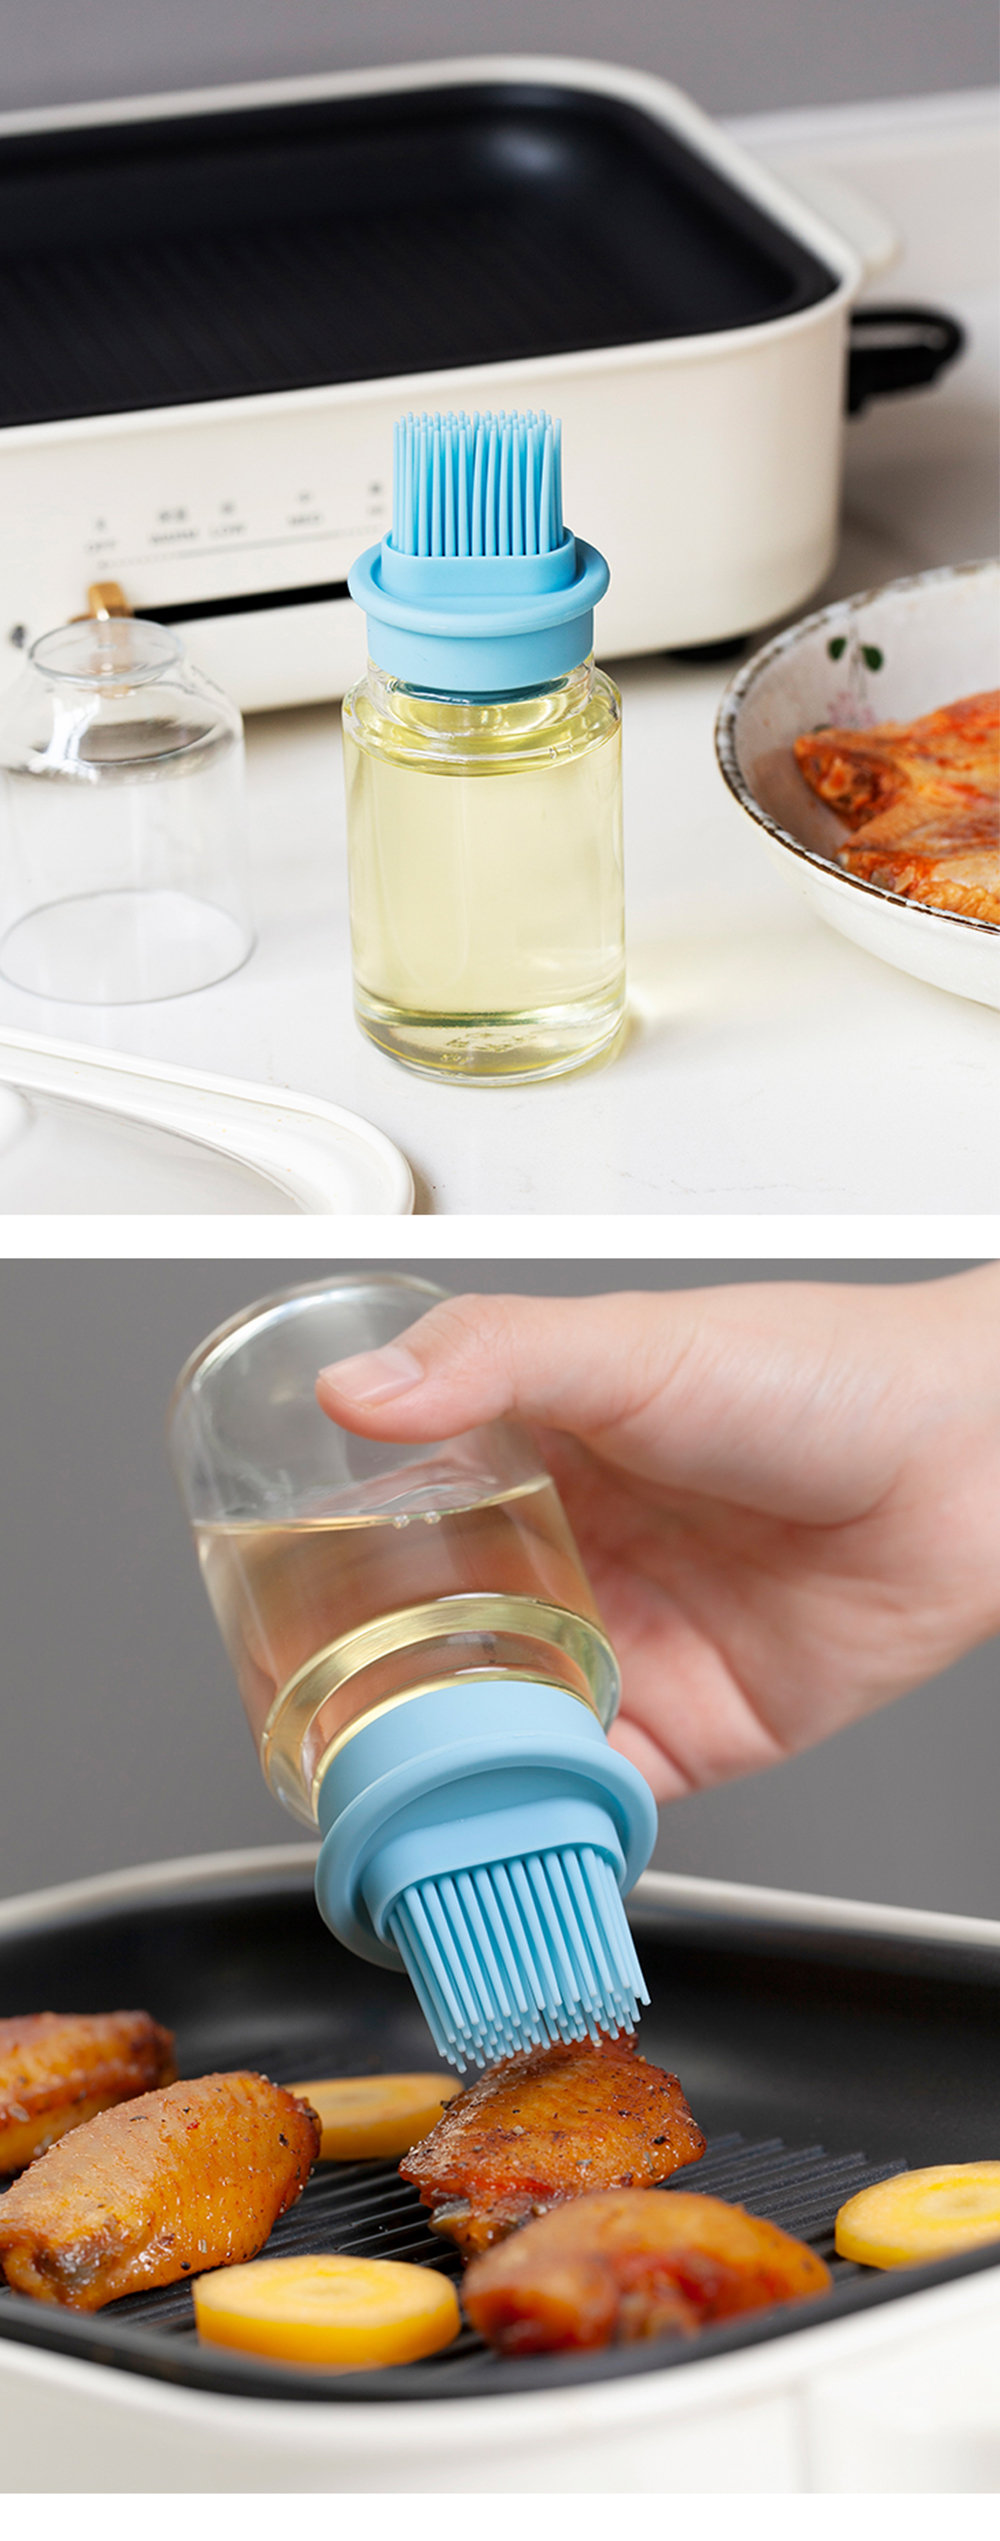 Oil Dispenser Bottle With Brush - Silicone - Soda-lime Glass - Blue - Pink  - ApolloBox